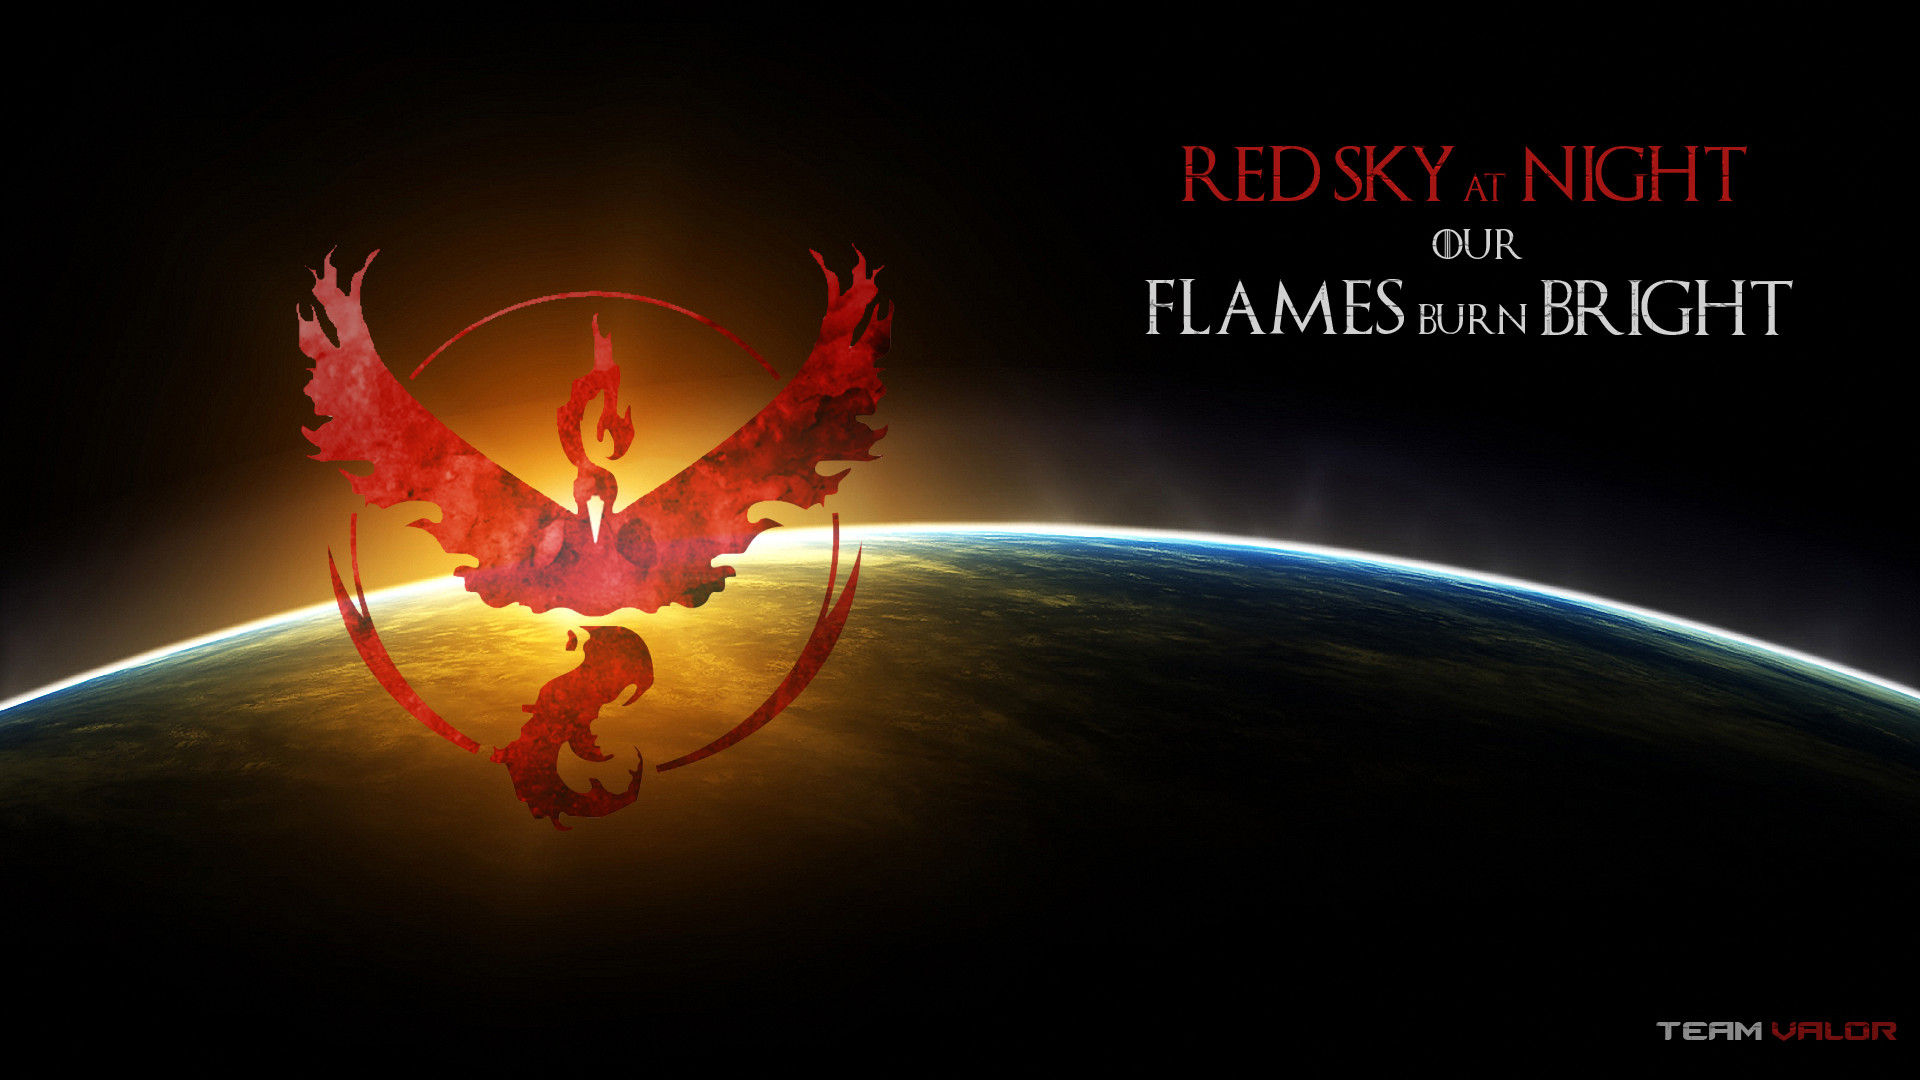 1920x1080 Red Sky at Night our flames burn bright - Team Valor PC wallpaper